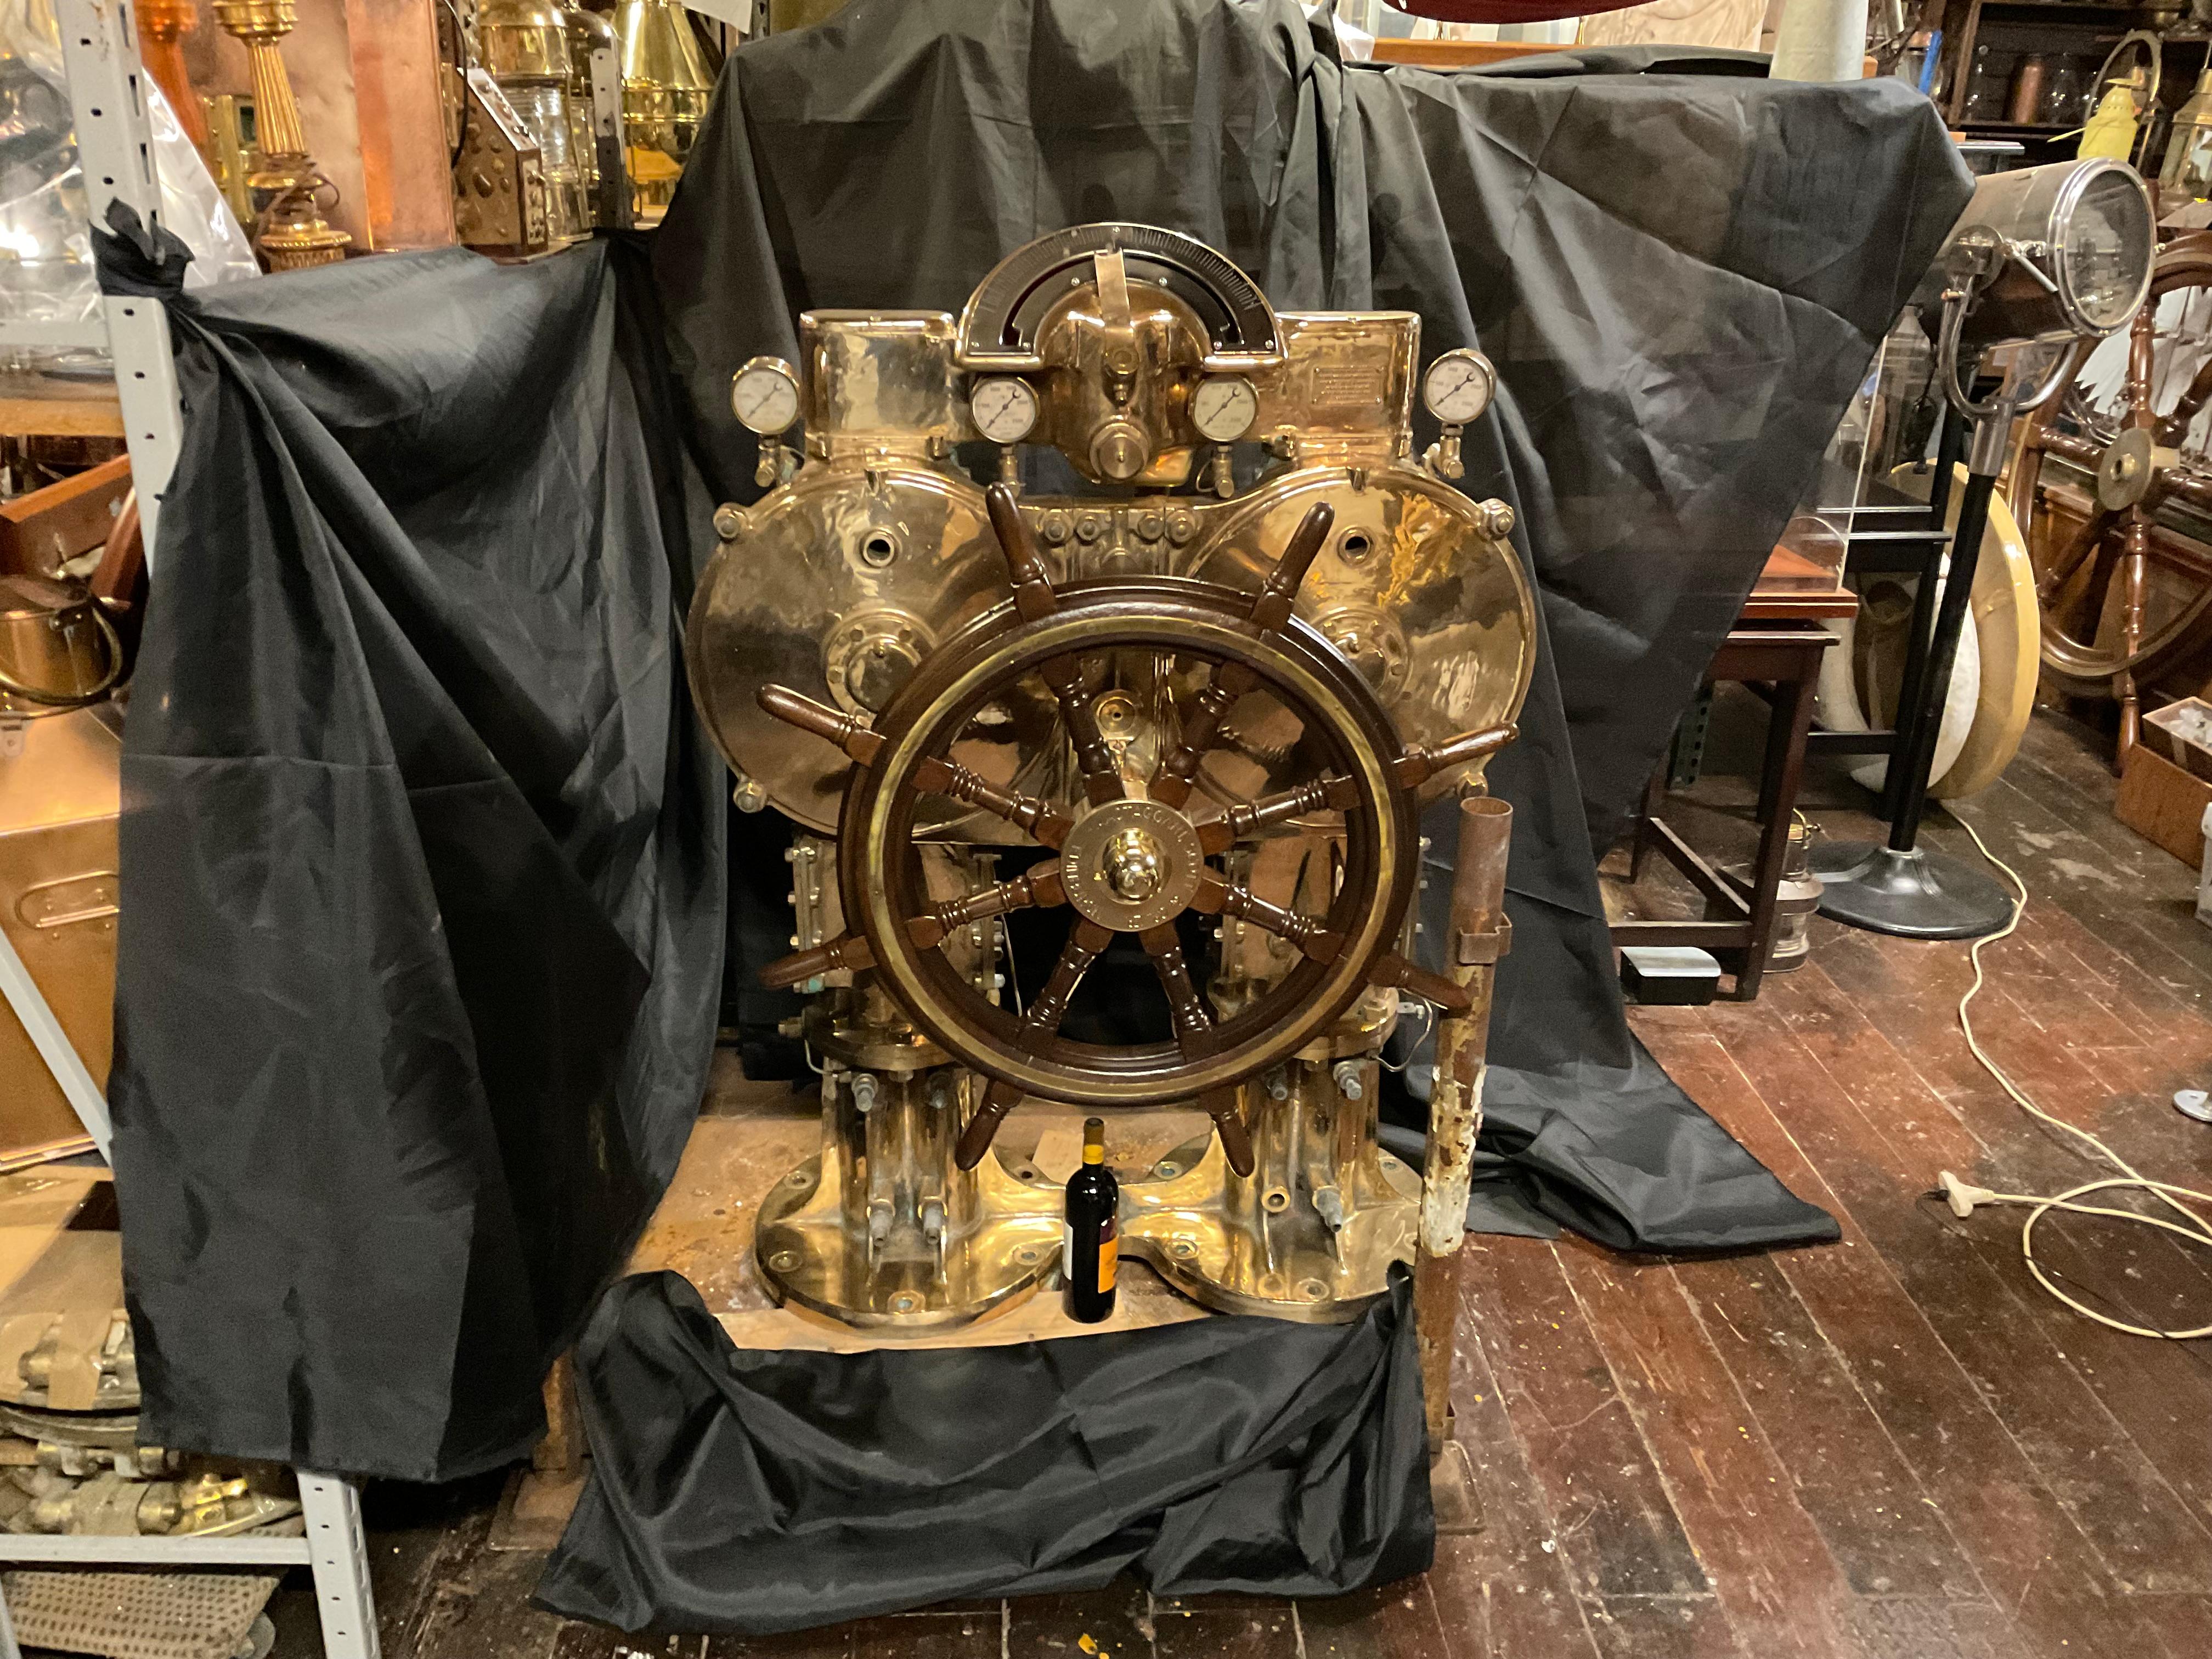 Massive 1400-pound glimmering brass emergency auxiliary steering station from the British Royal Navy Aircraft Carrier HMS Invincible. It is immense, it is spectacular and amazing. With accessory gauges, gears, tubes, brackets, rudder indicator, etc.